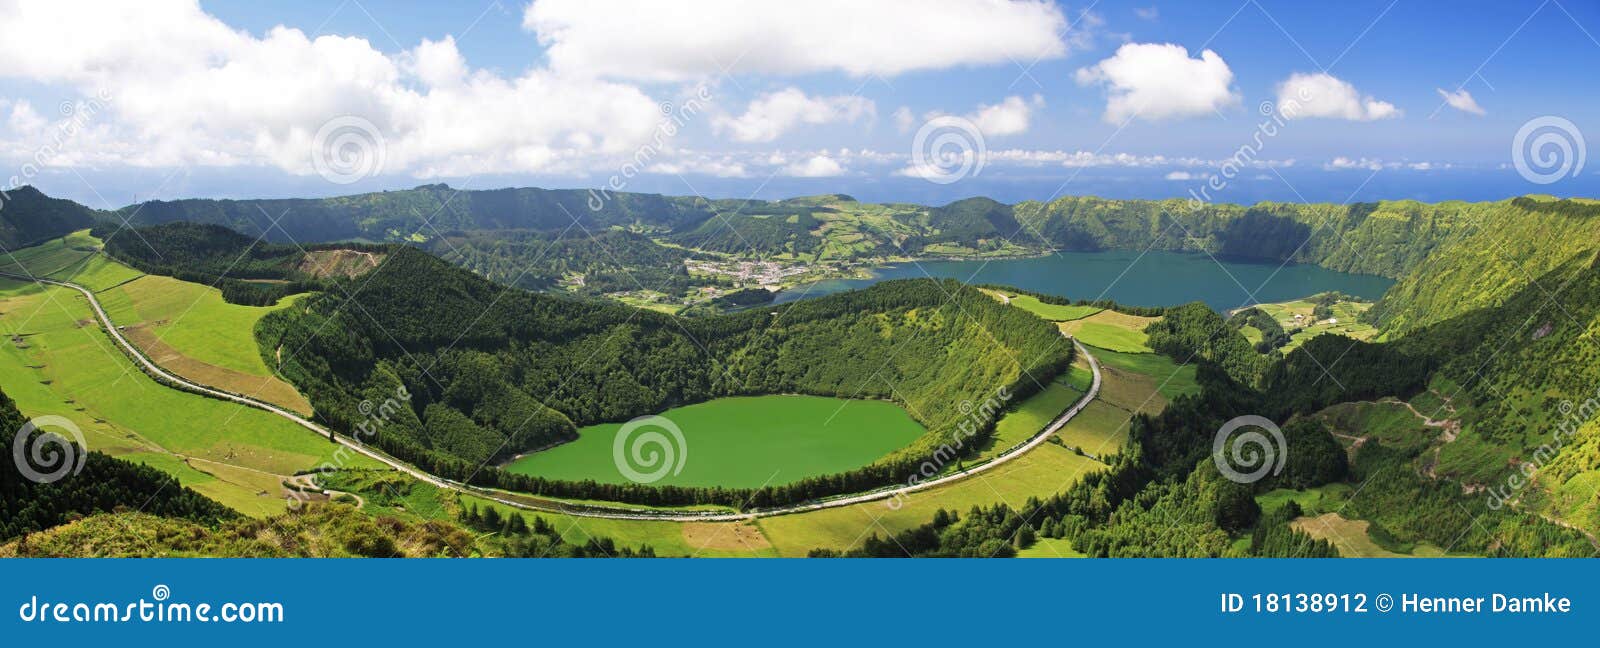 viewpoint azores - panorama